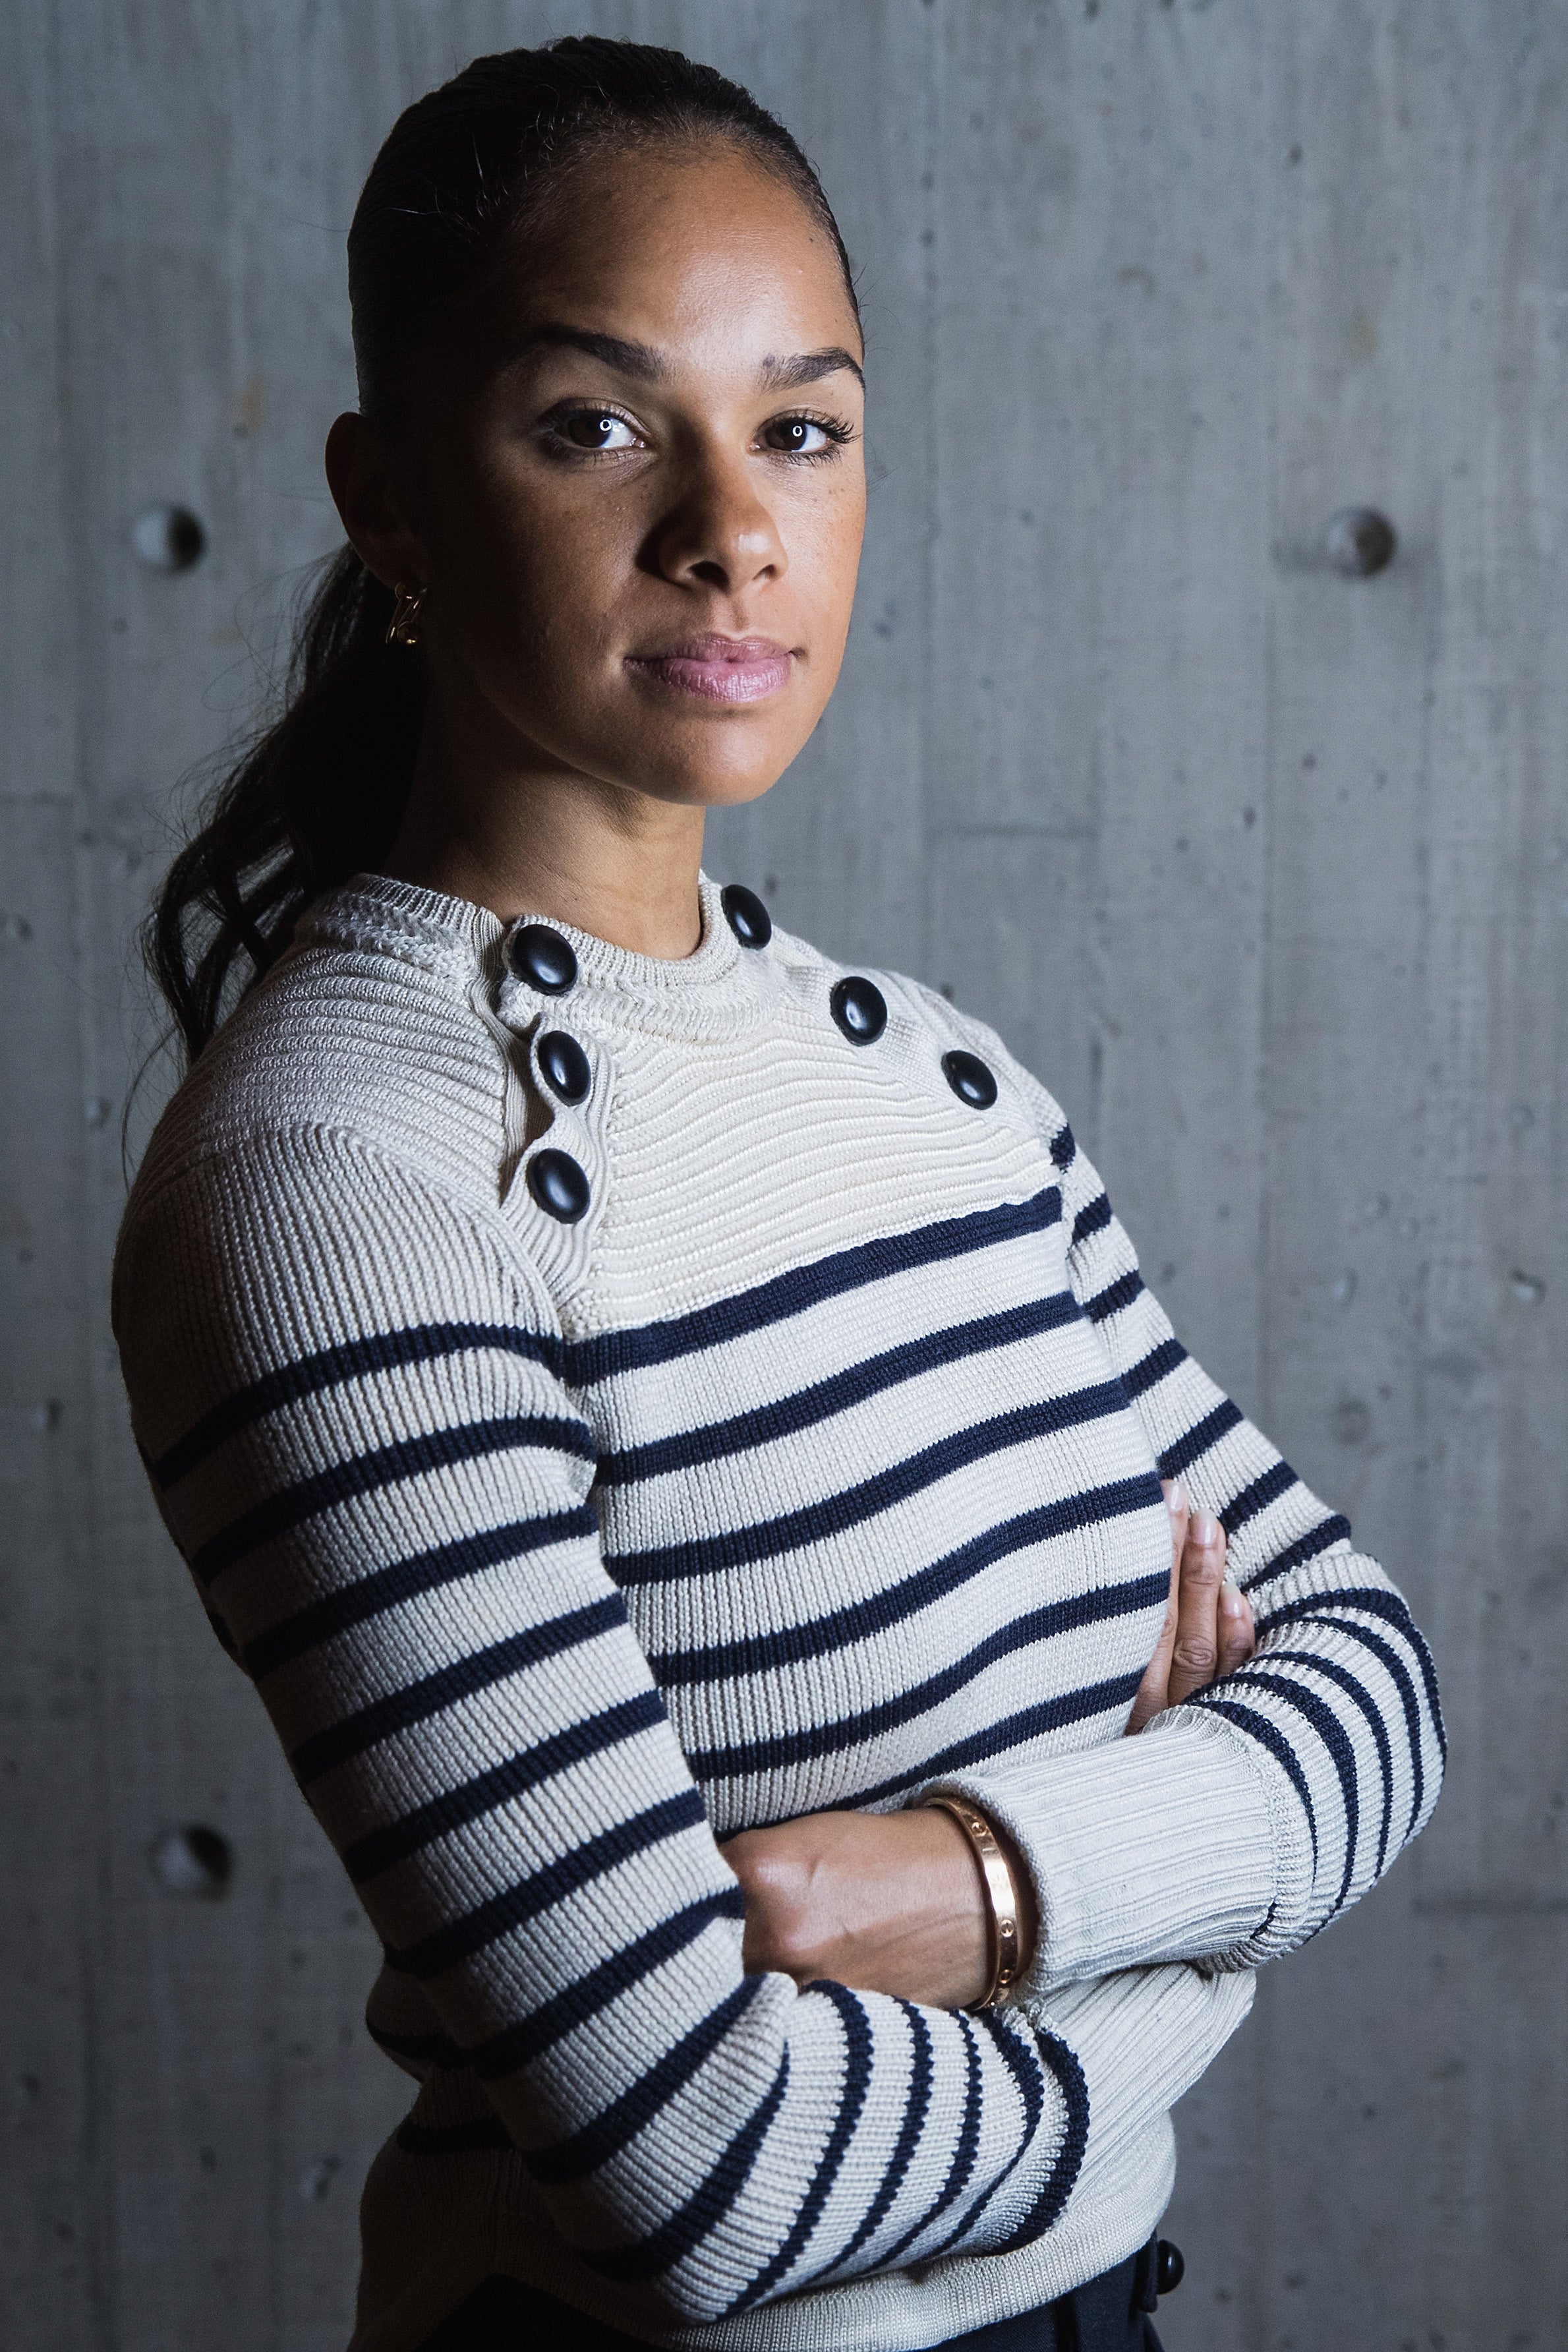 Misty Copeland On Building Resilience, Her Gym Pet Peeve, And The One Move She Swears By
